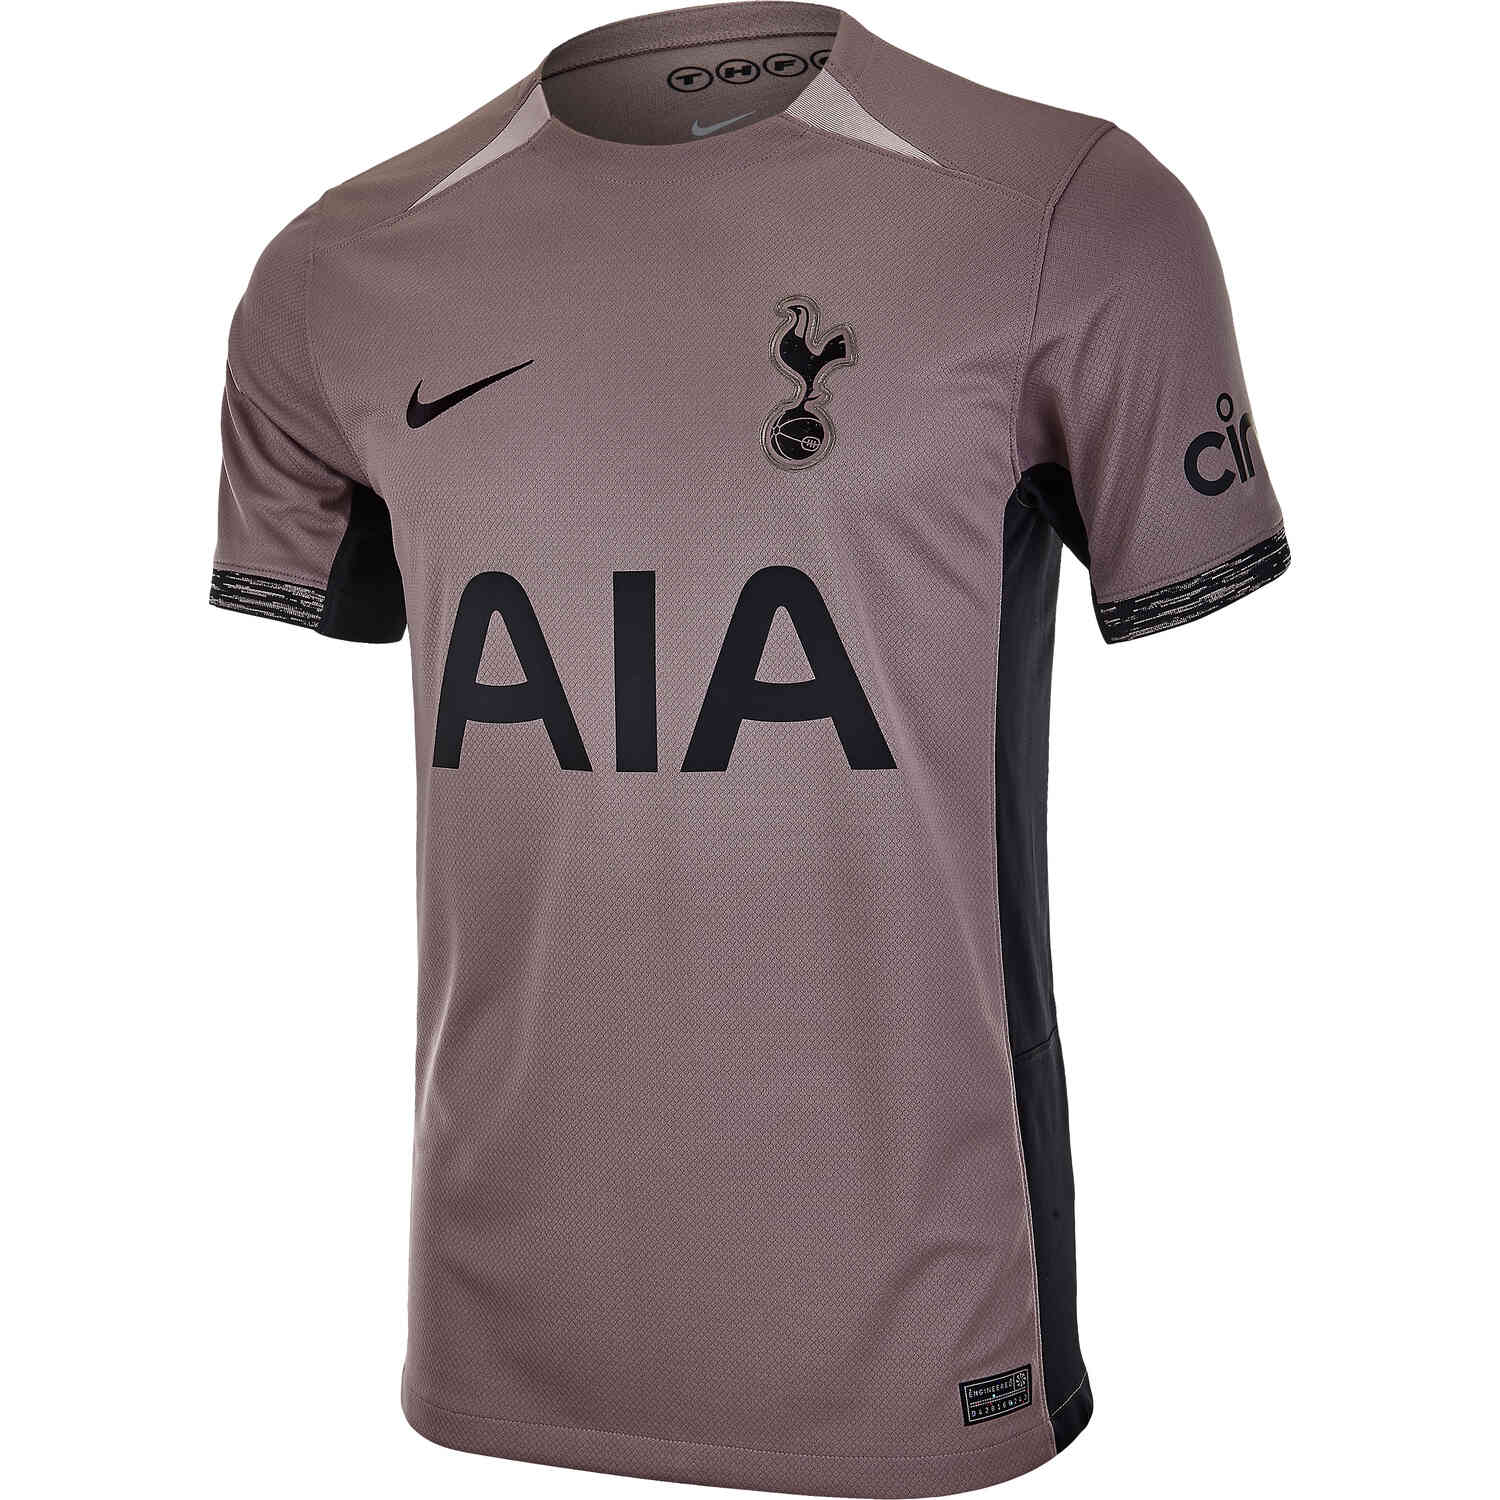 Tottenham Hotspur Have Released Their Away Kit For The New Premier